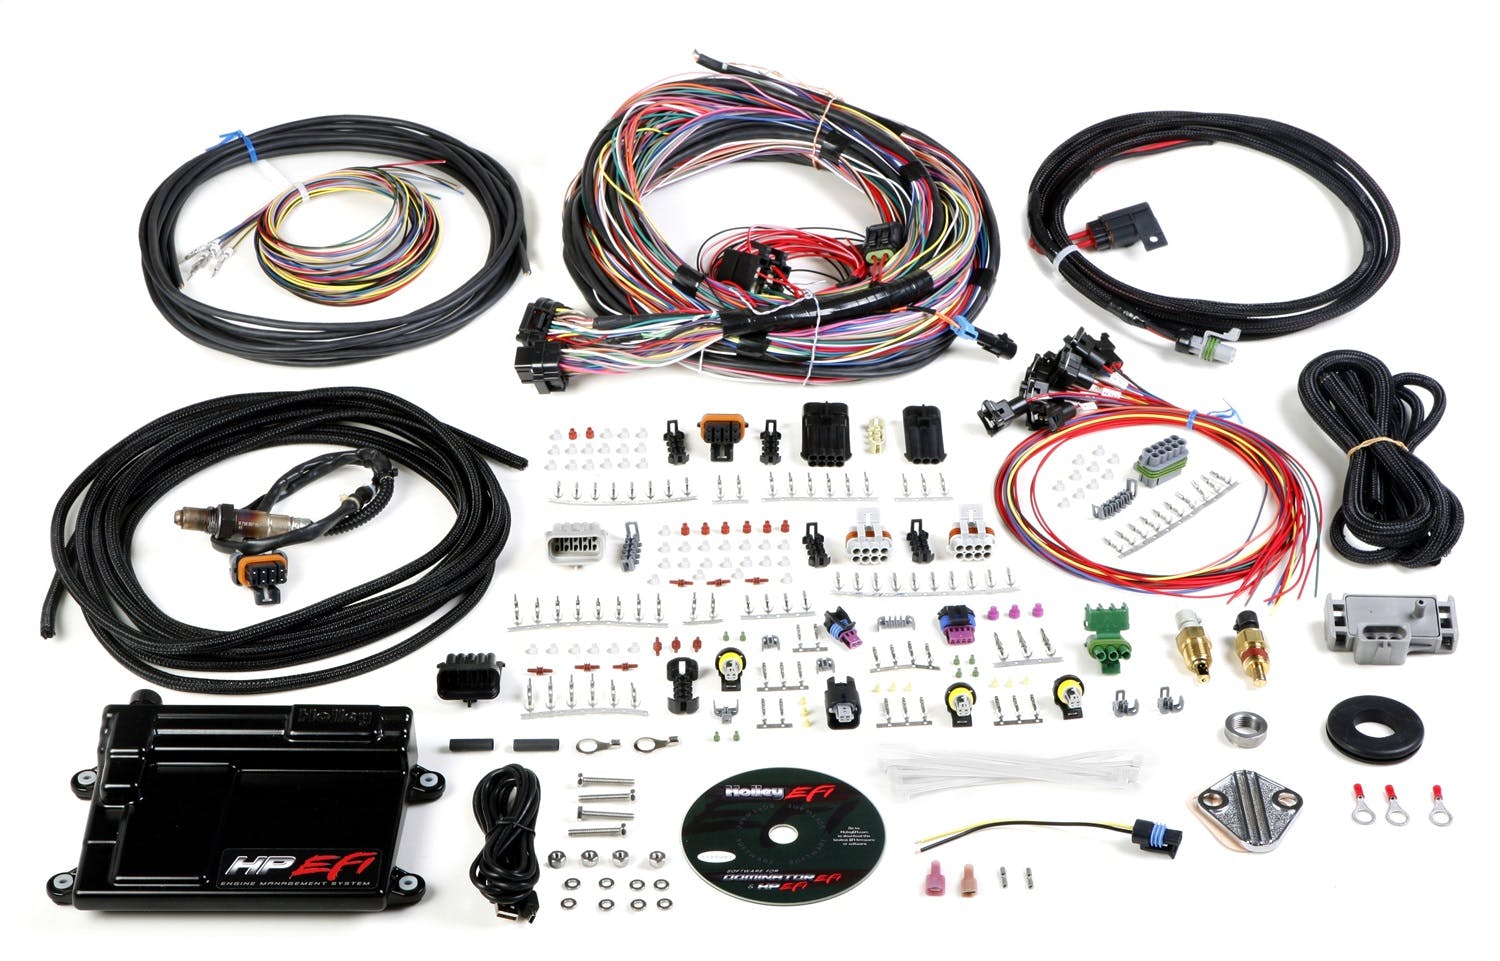 Holley EFI 550-605 HP ECU AND UNTERMINATED HARNESS KIT